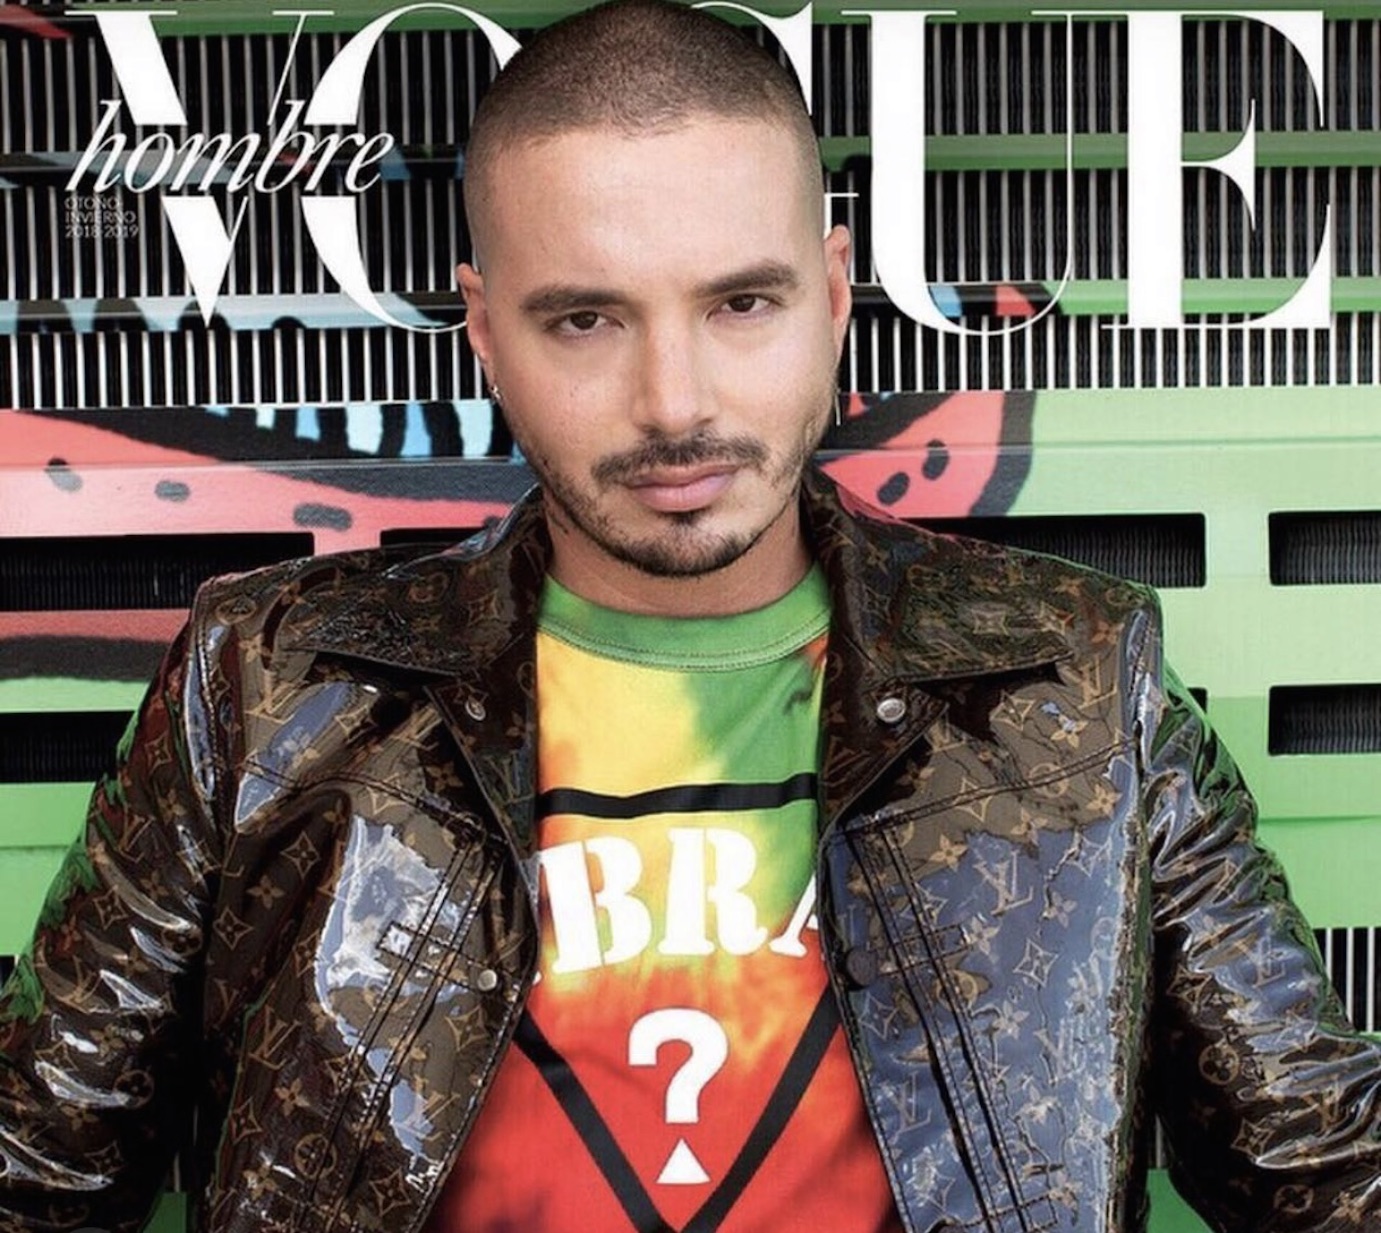 Vogue features J Balvin with Styling by VCI artists